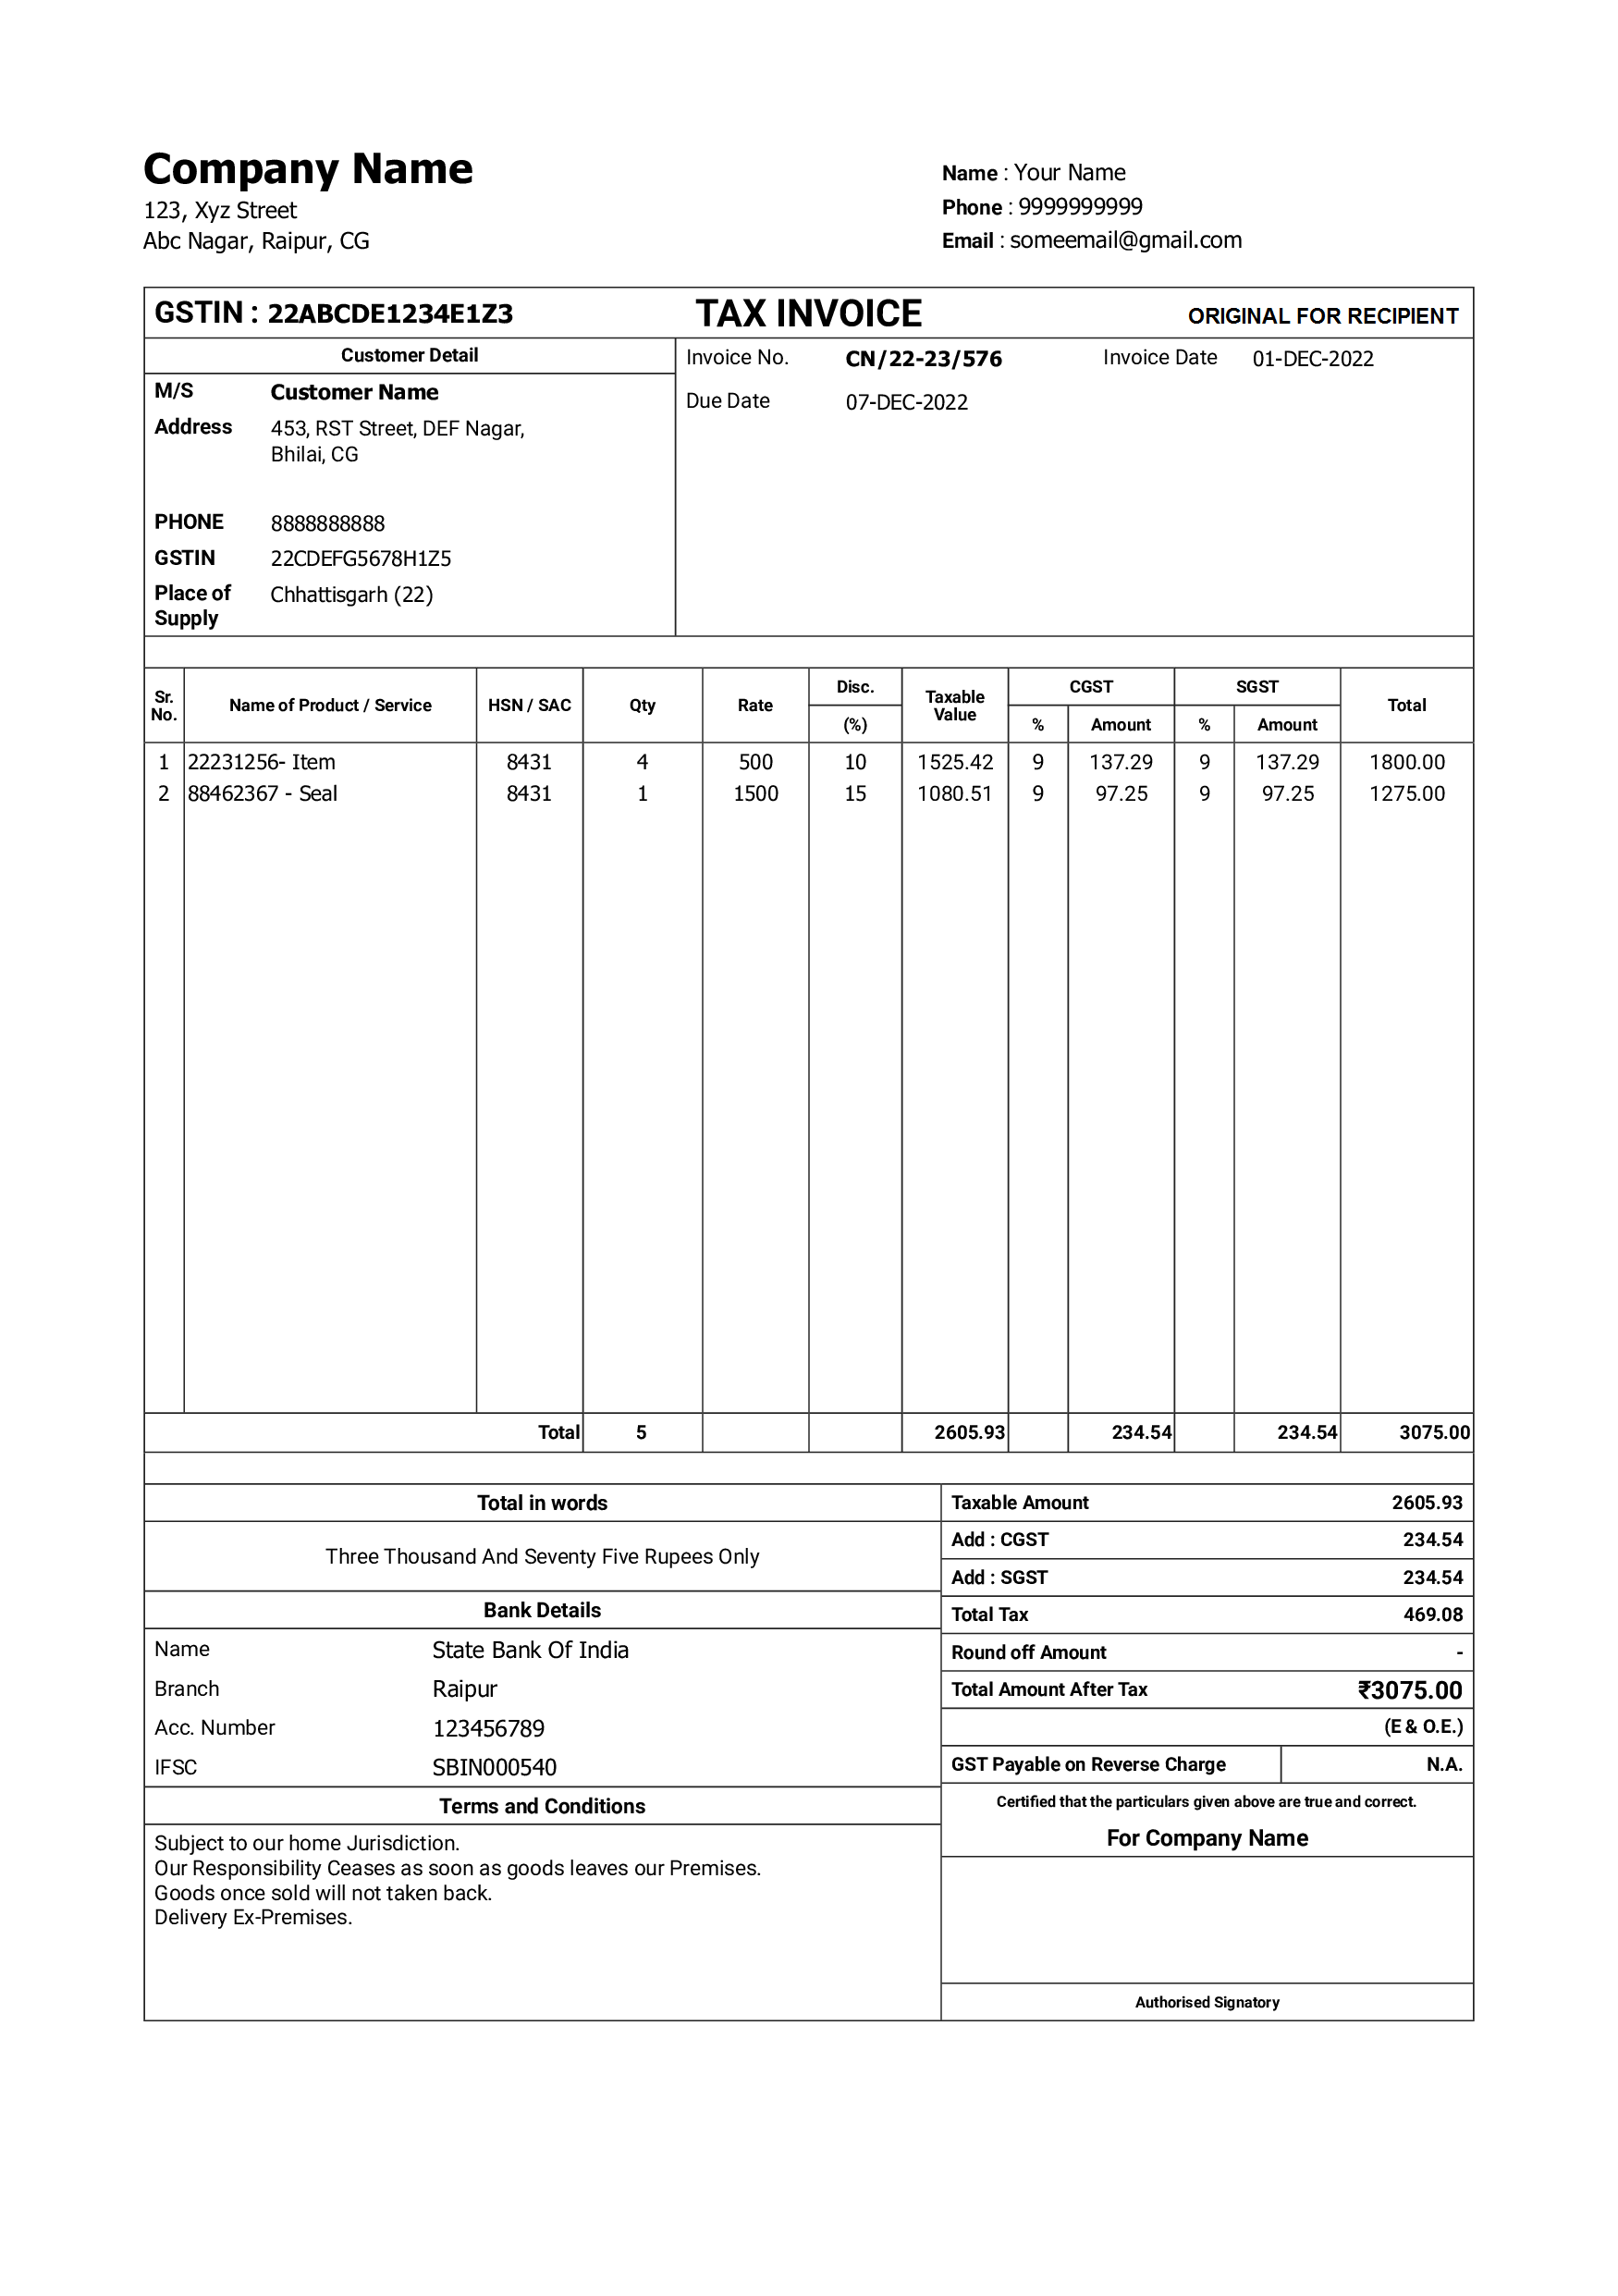 Indian Gst invoice template design in A4 size